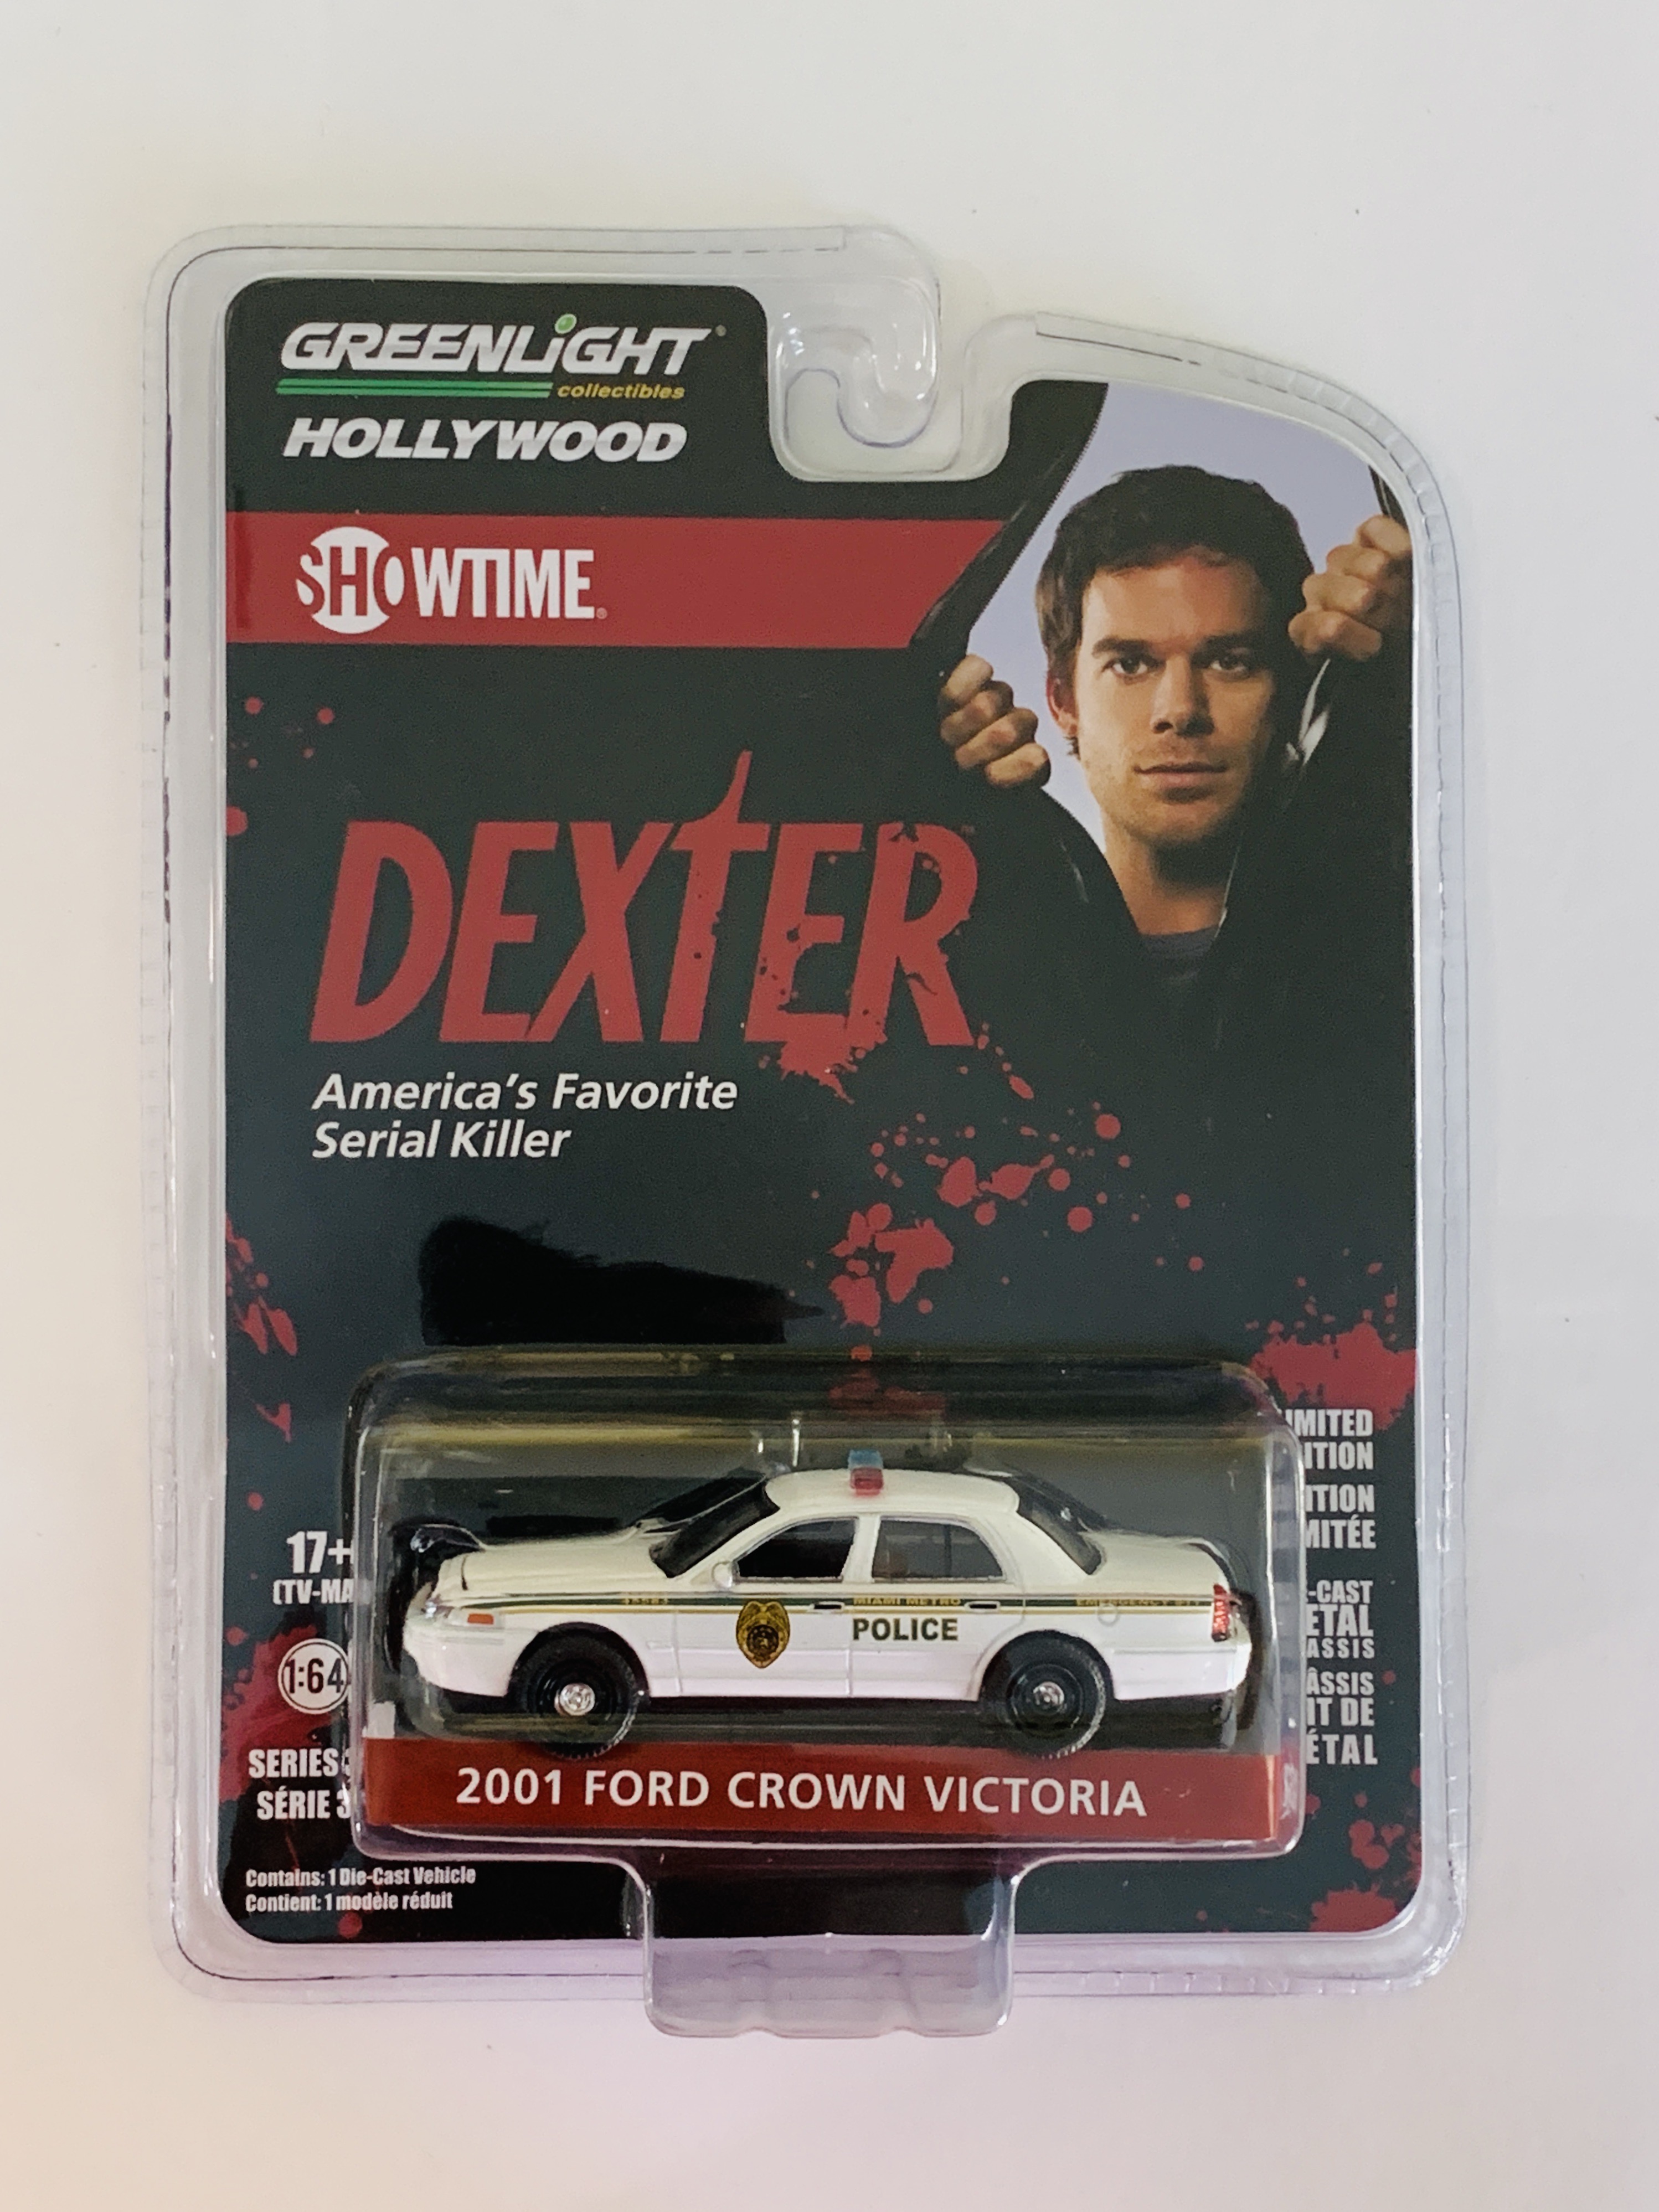 Greenlight Showtime Dexter 2001 Ford Crown Victoria Police